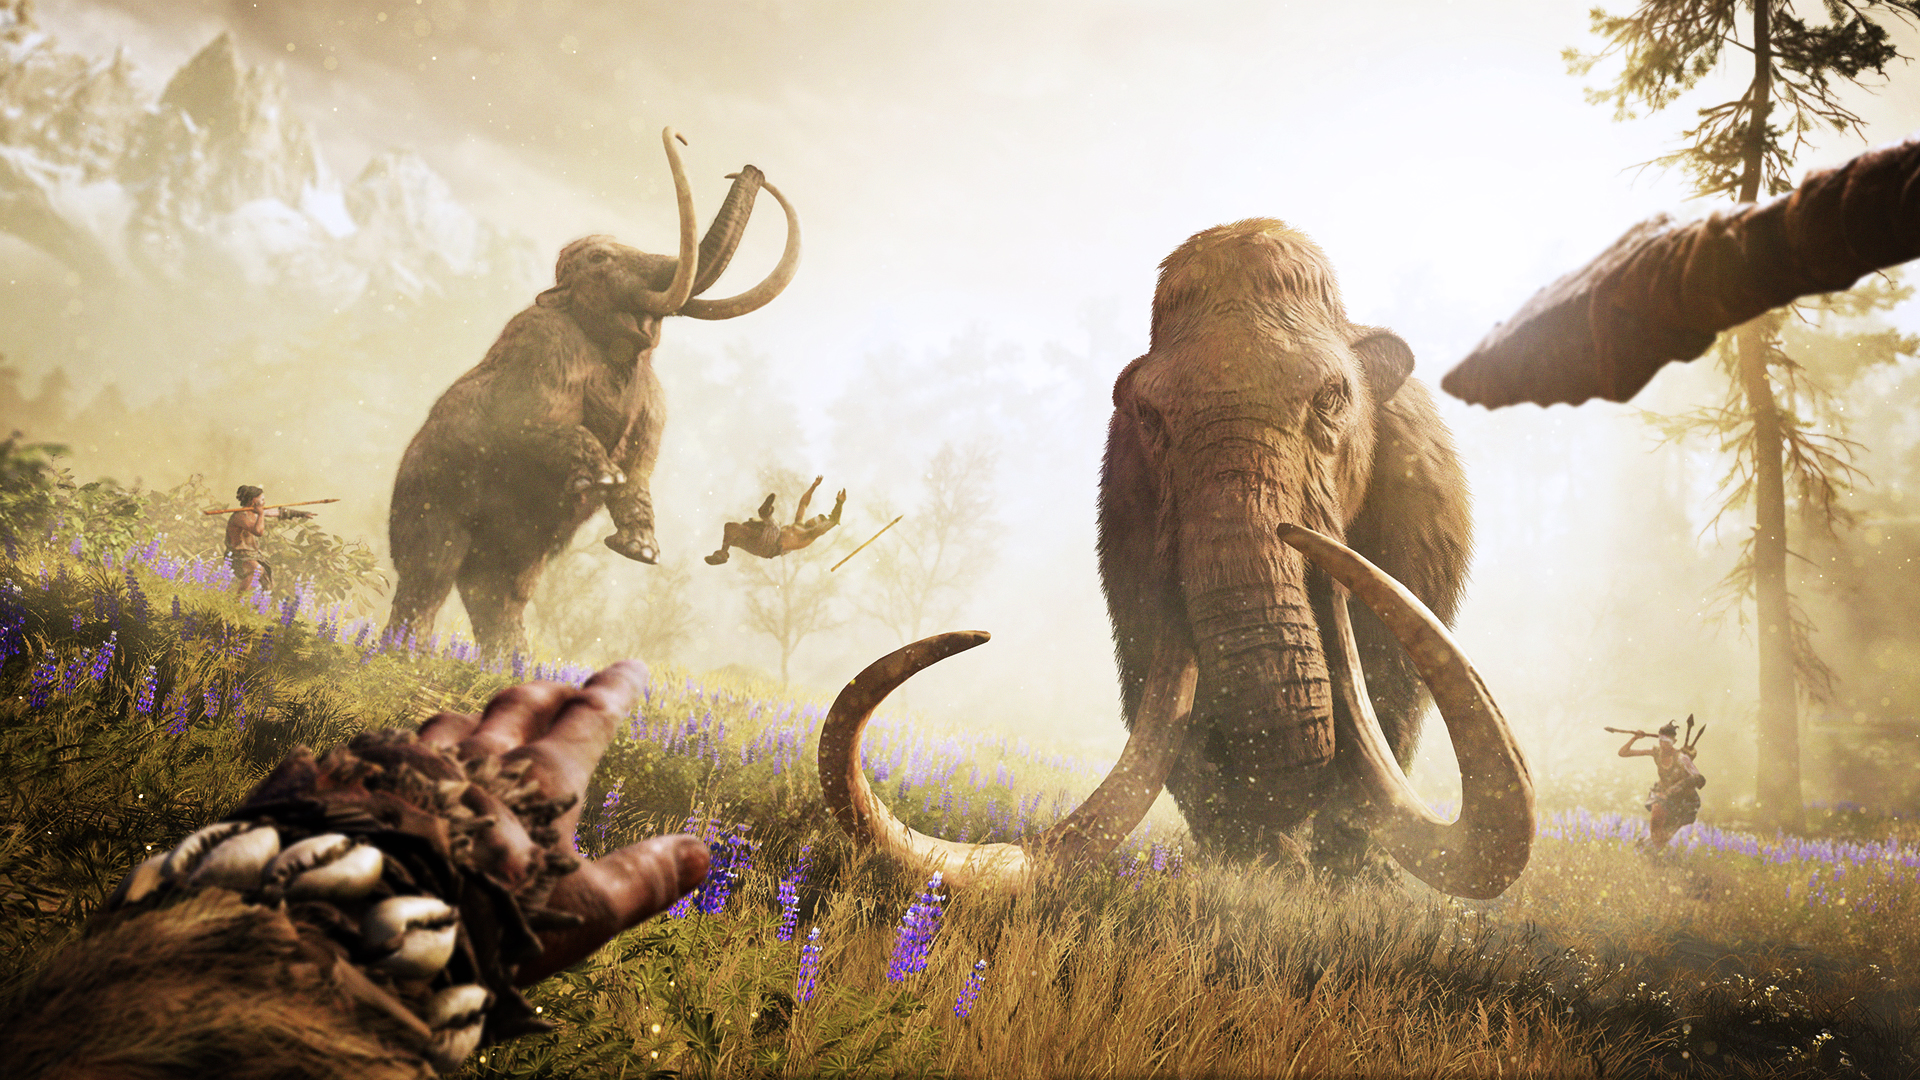 Far Cry Primal brings life to the stone age